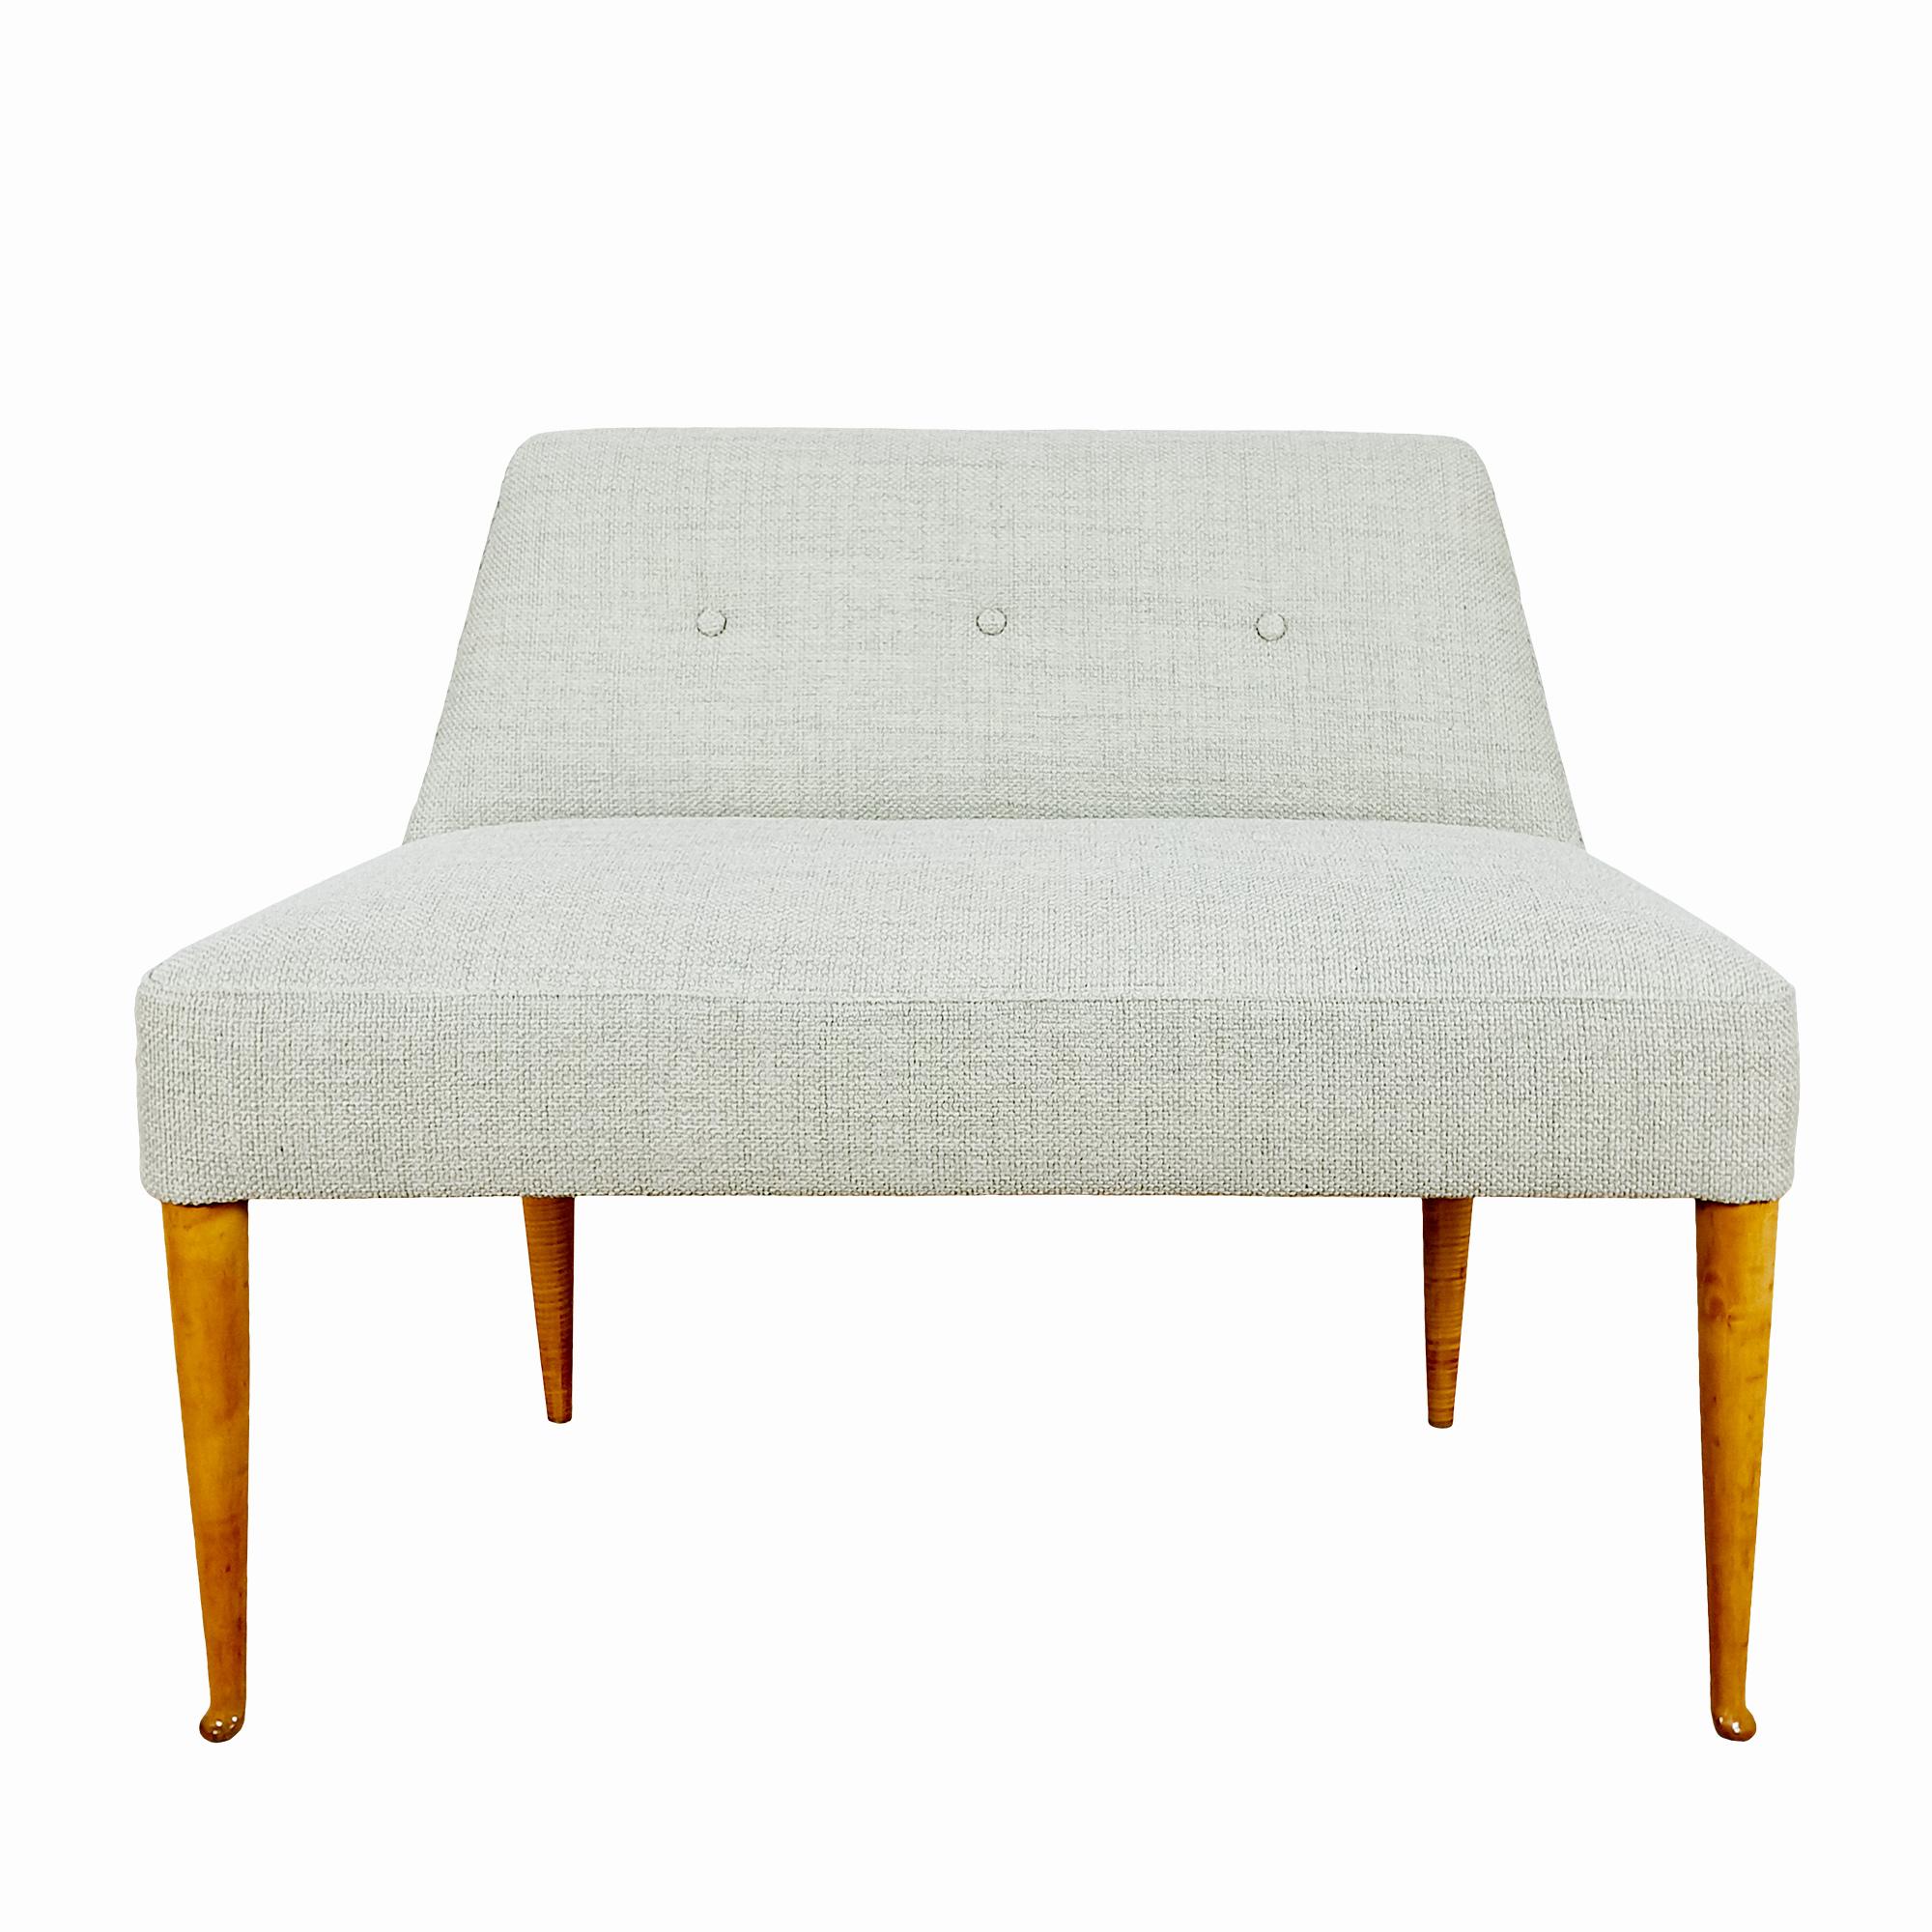 Small bench with backrest and four long legs in solid shellac-varnished maple. Upholstery redone in greige chenille fabric.
Italy, early 1950s.